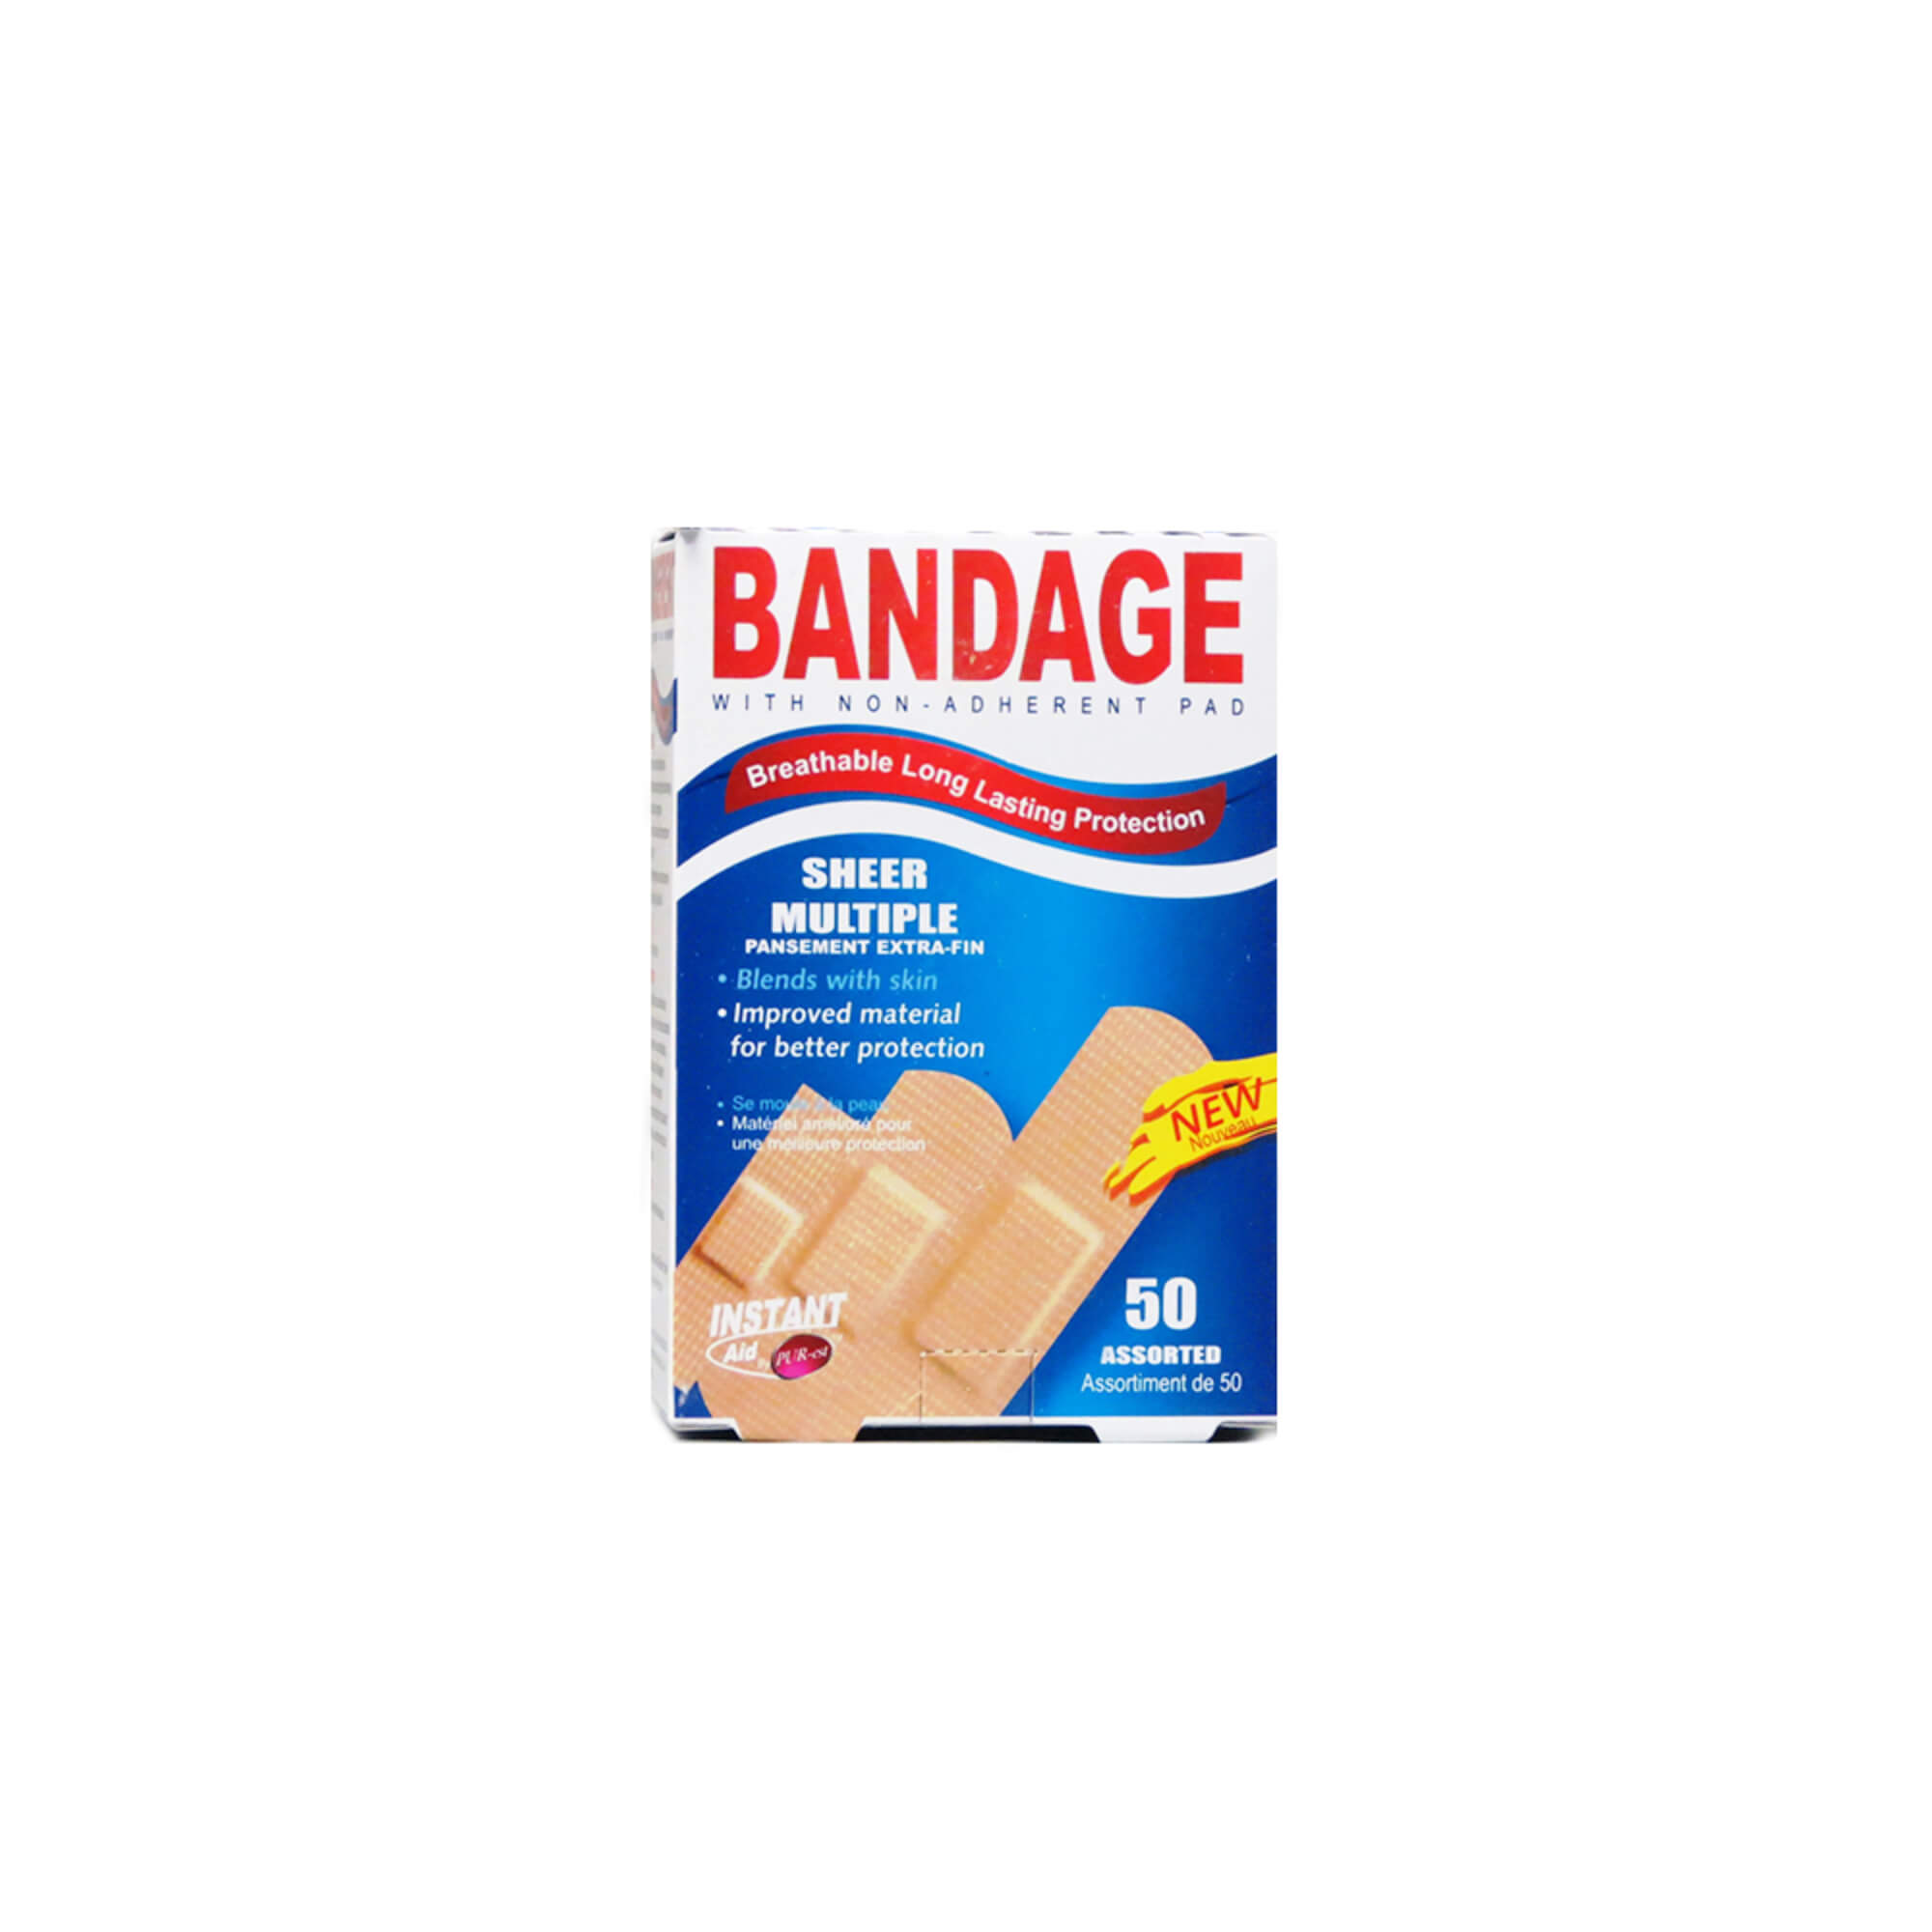 Purest Instant Aid Sheer Multiple Bandage (50 In 1 Pack)